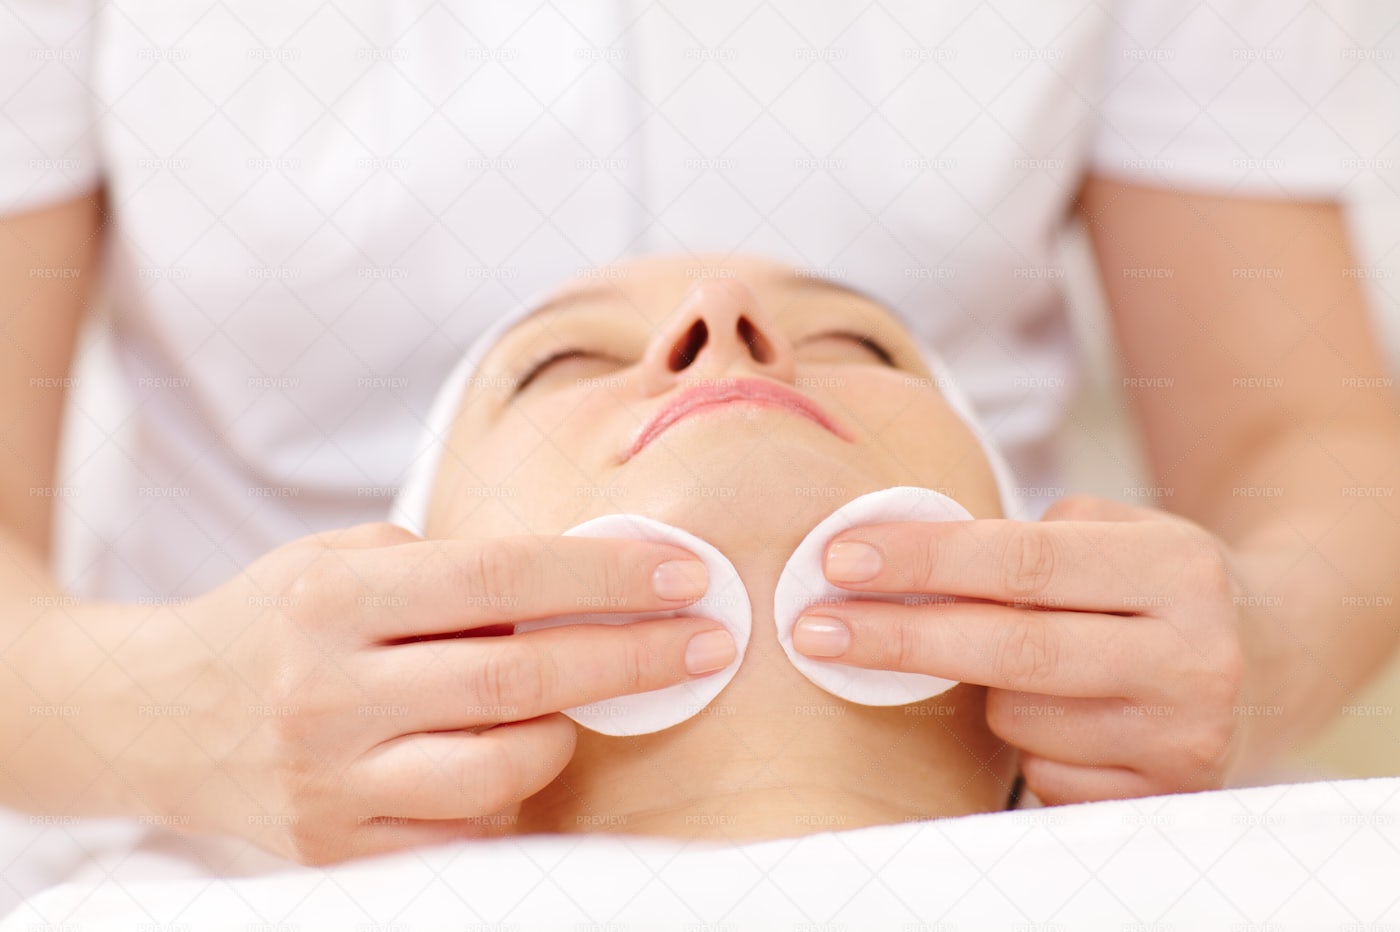 Cosmetician Cleaning A Face: Stock Photos